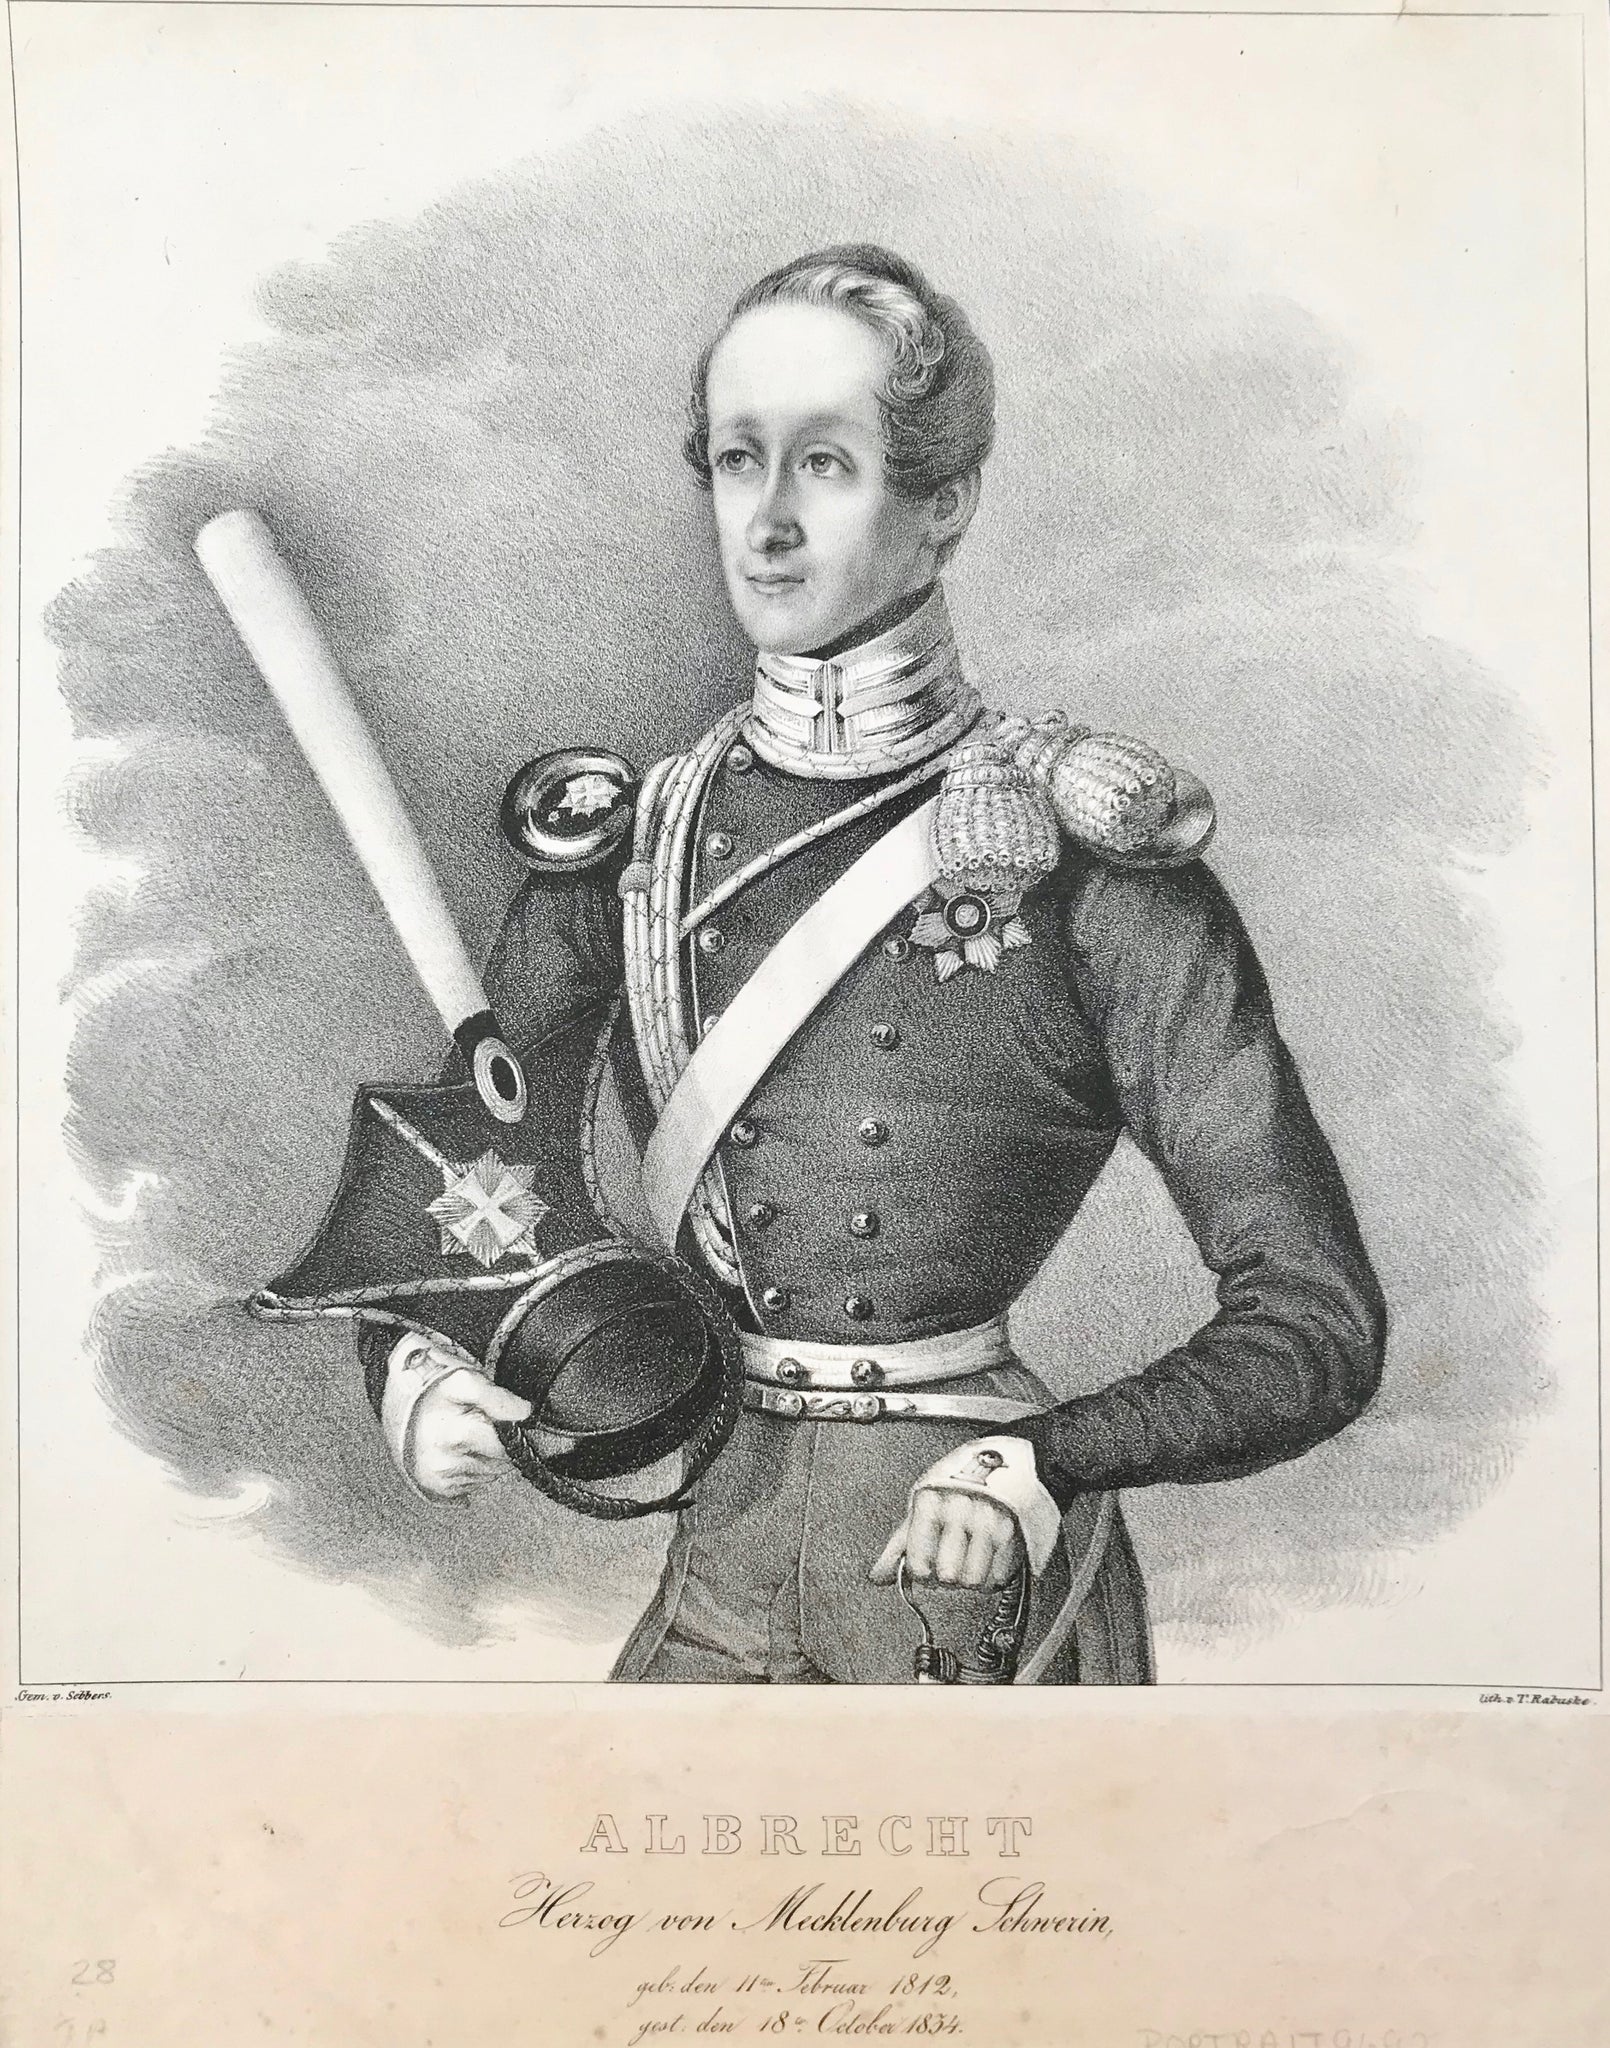 "Albrecht Herzog von Mecklenburg Schwerin" (1812 -1834).  Posthumous lithograph by T. Rabuske after painting by Ludwig Sebbers. Printed on China paper and rolled onto sturdier paper. Title on base paper. Ca. 1845.